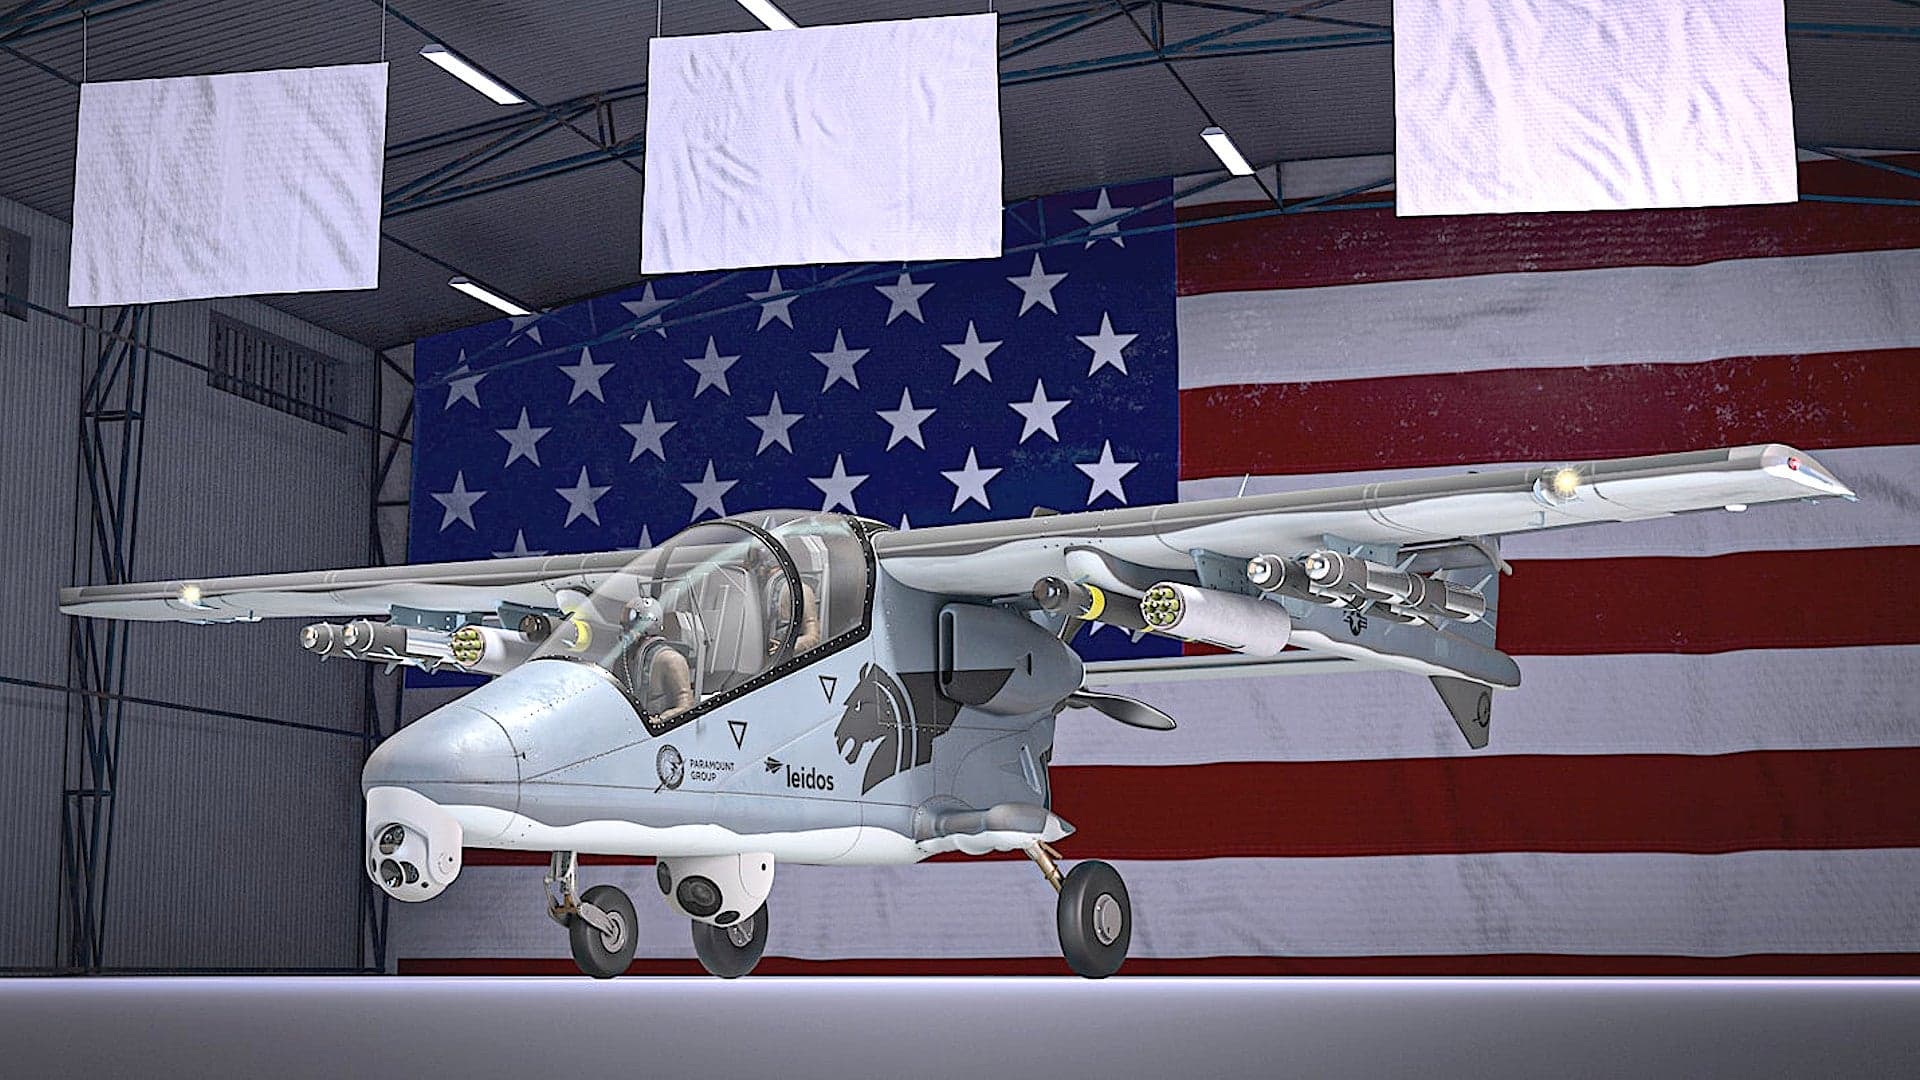 New Team Pitches South Africa’s Bronco II Light Attack Plane To American Special Operators